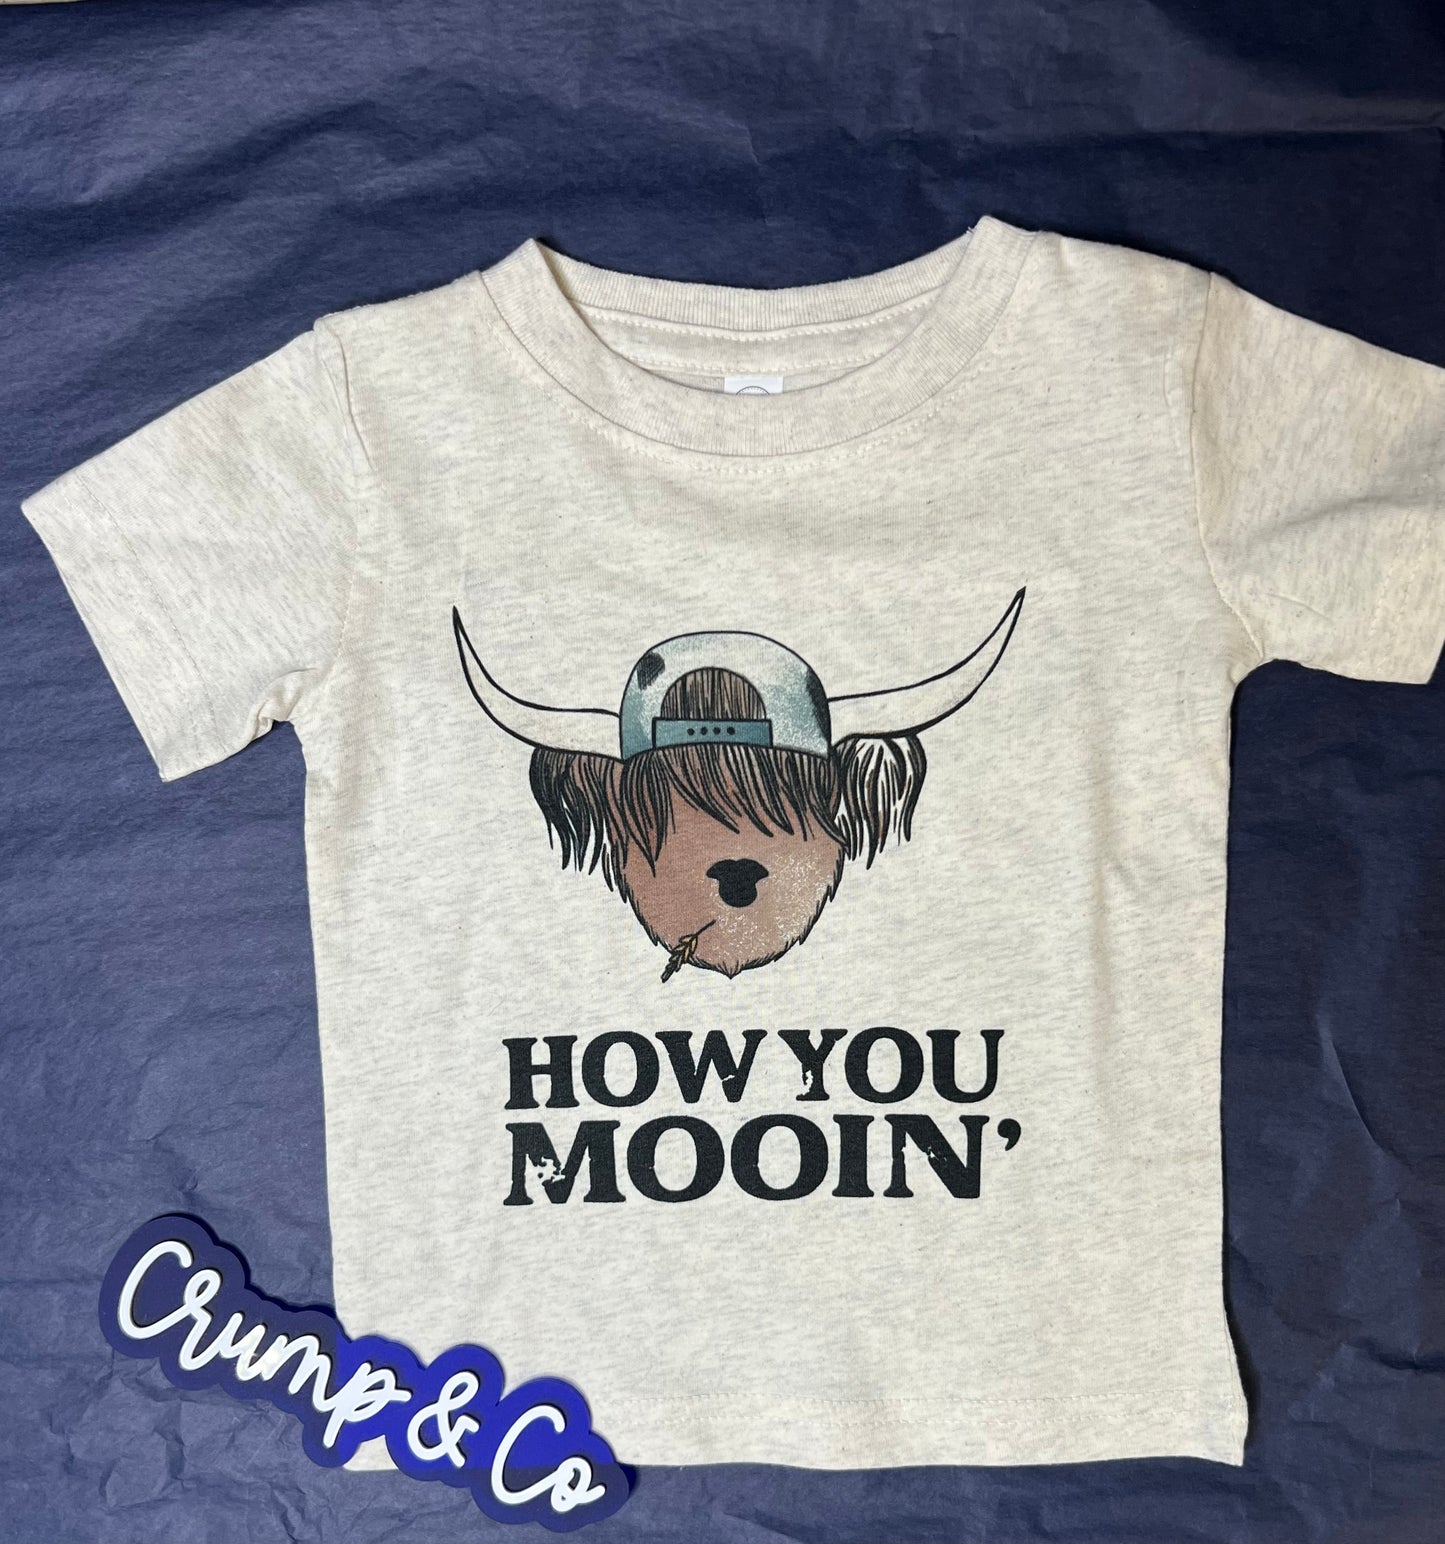 You Mooin' | Graphic T-shirt